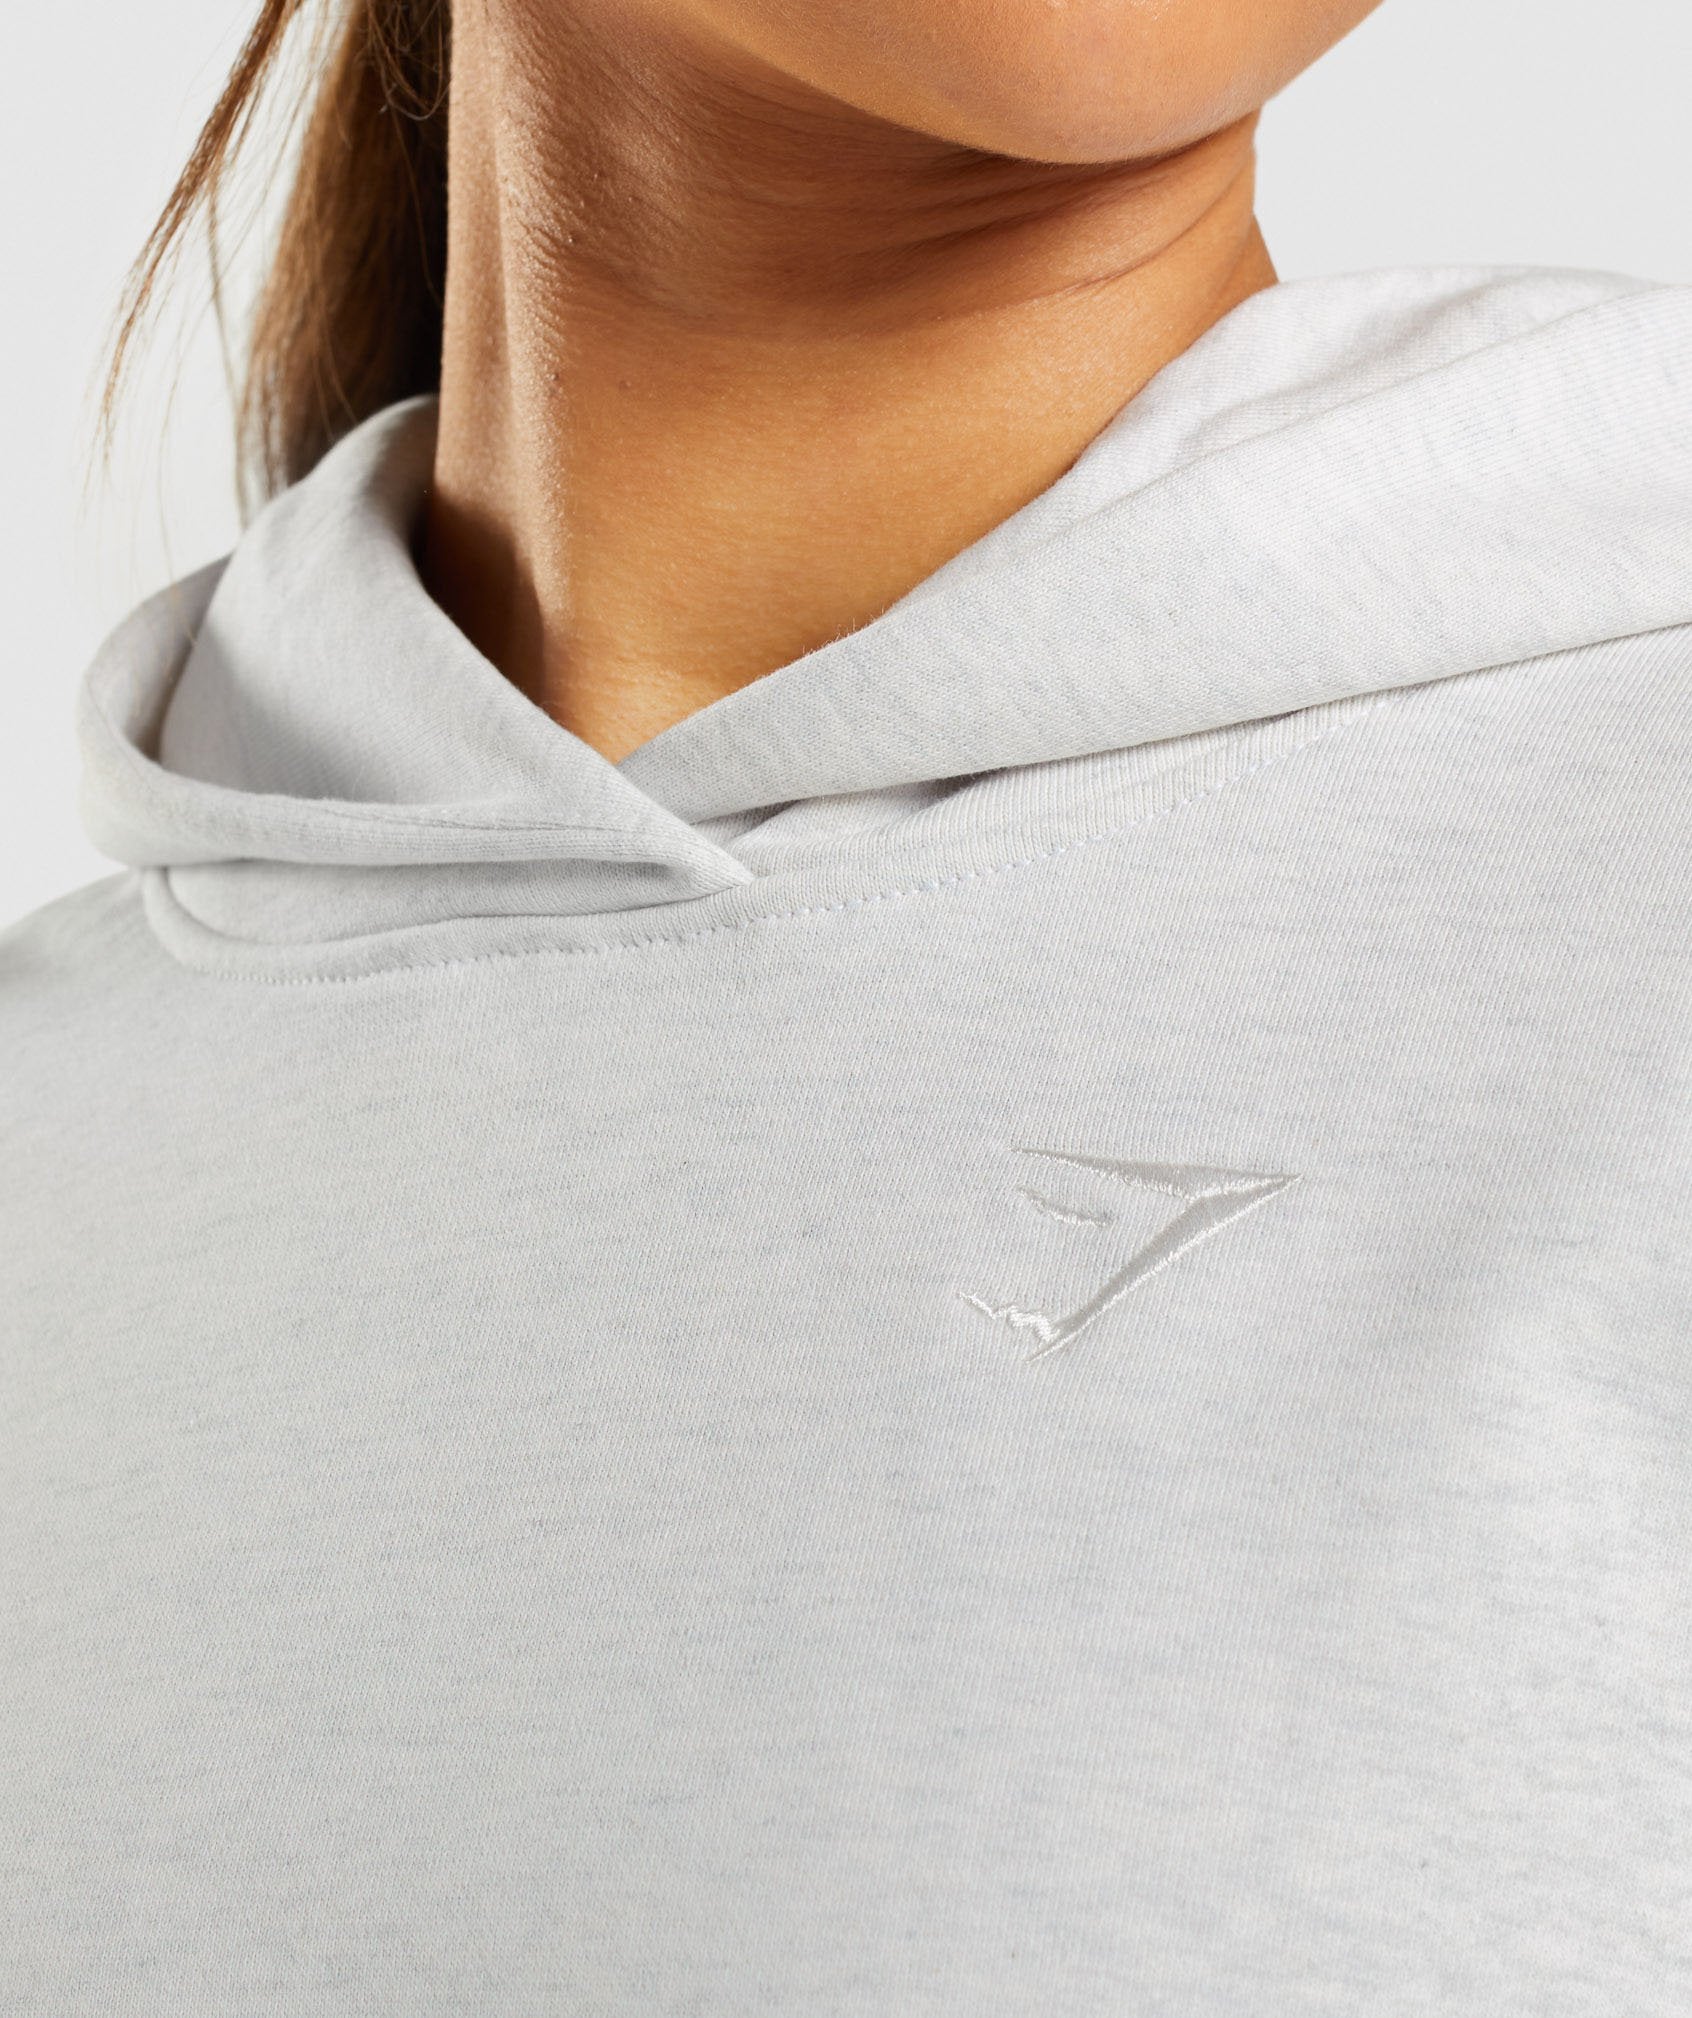 Rest Day Sweats Hoodie product image 6